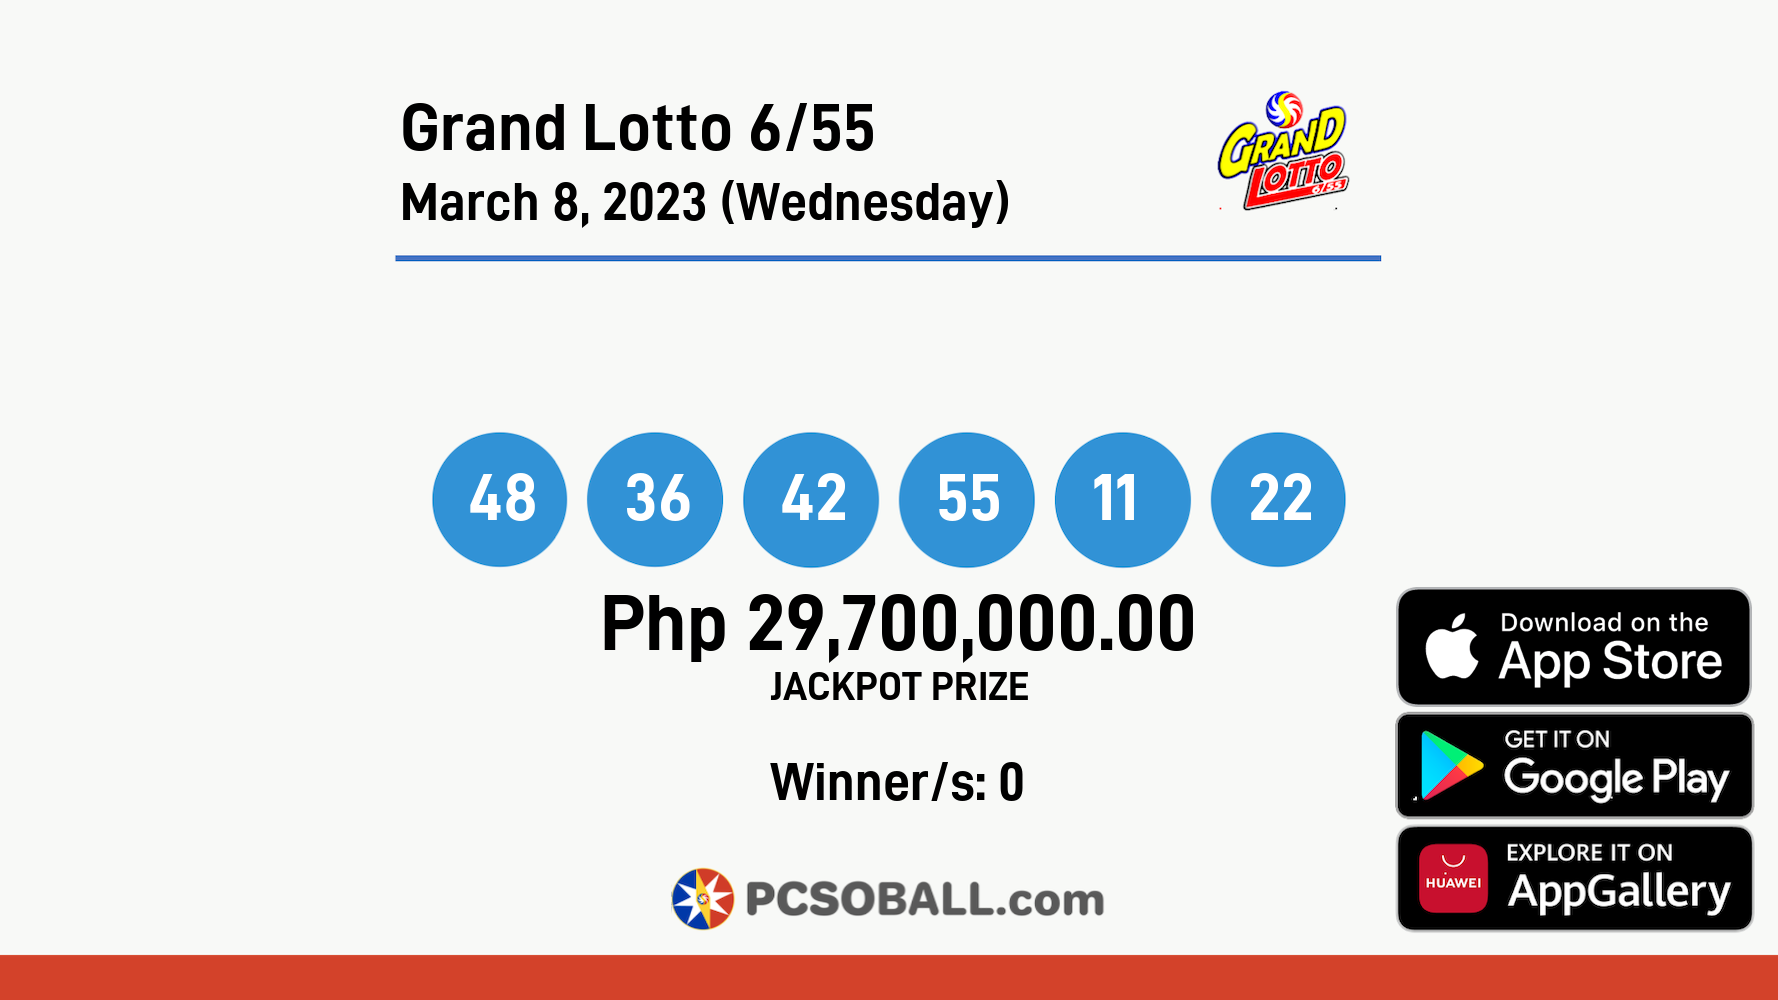 Grand Lotto 6/55 March 8, 2023 (Wednesday) Result